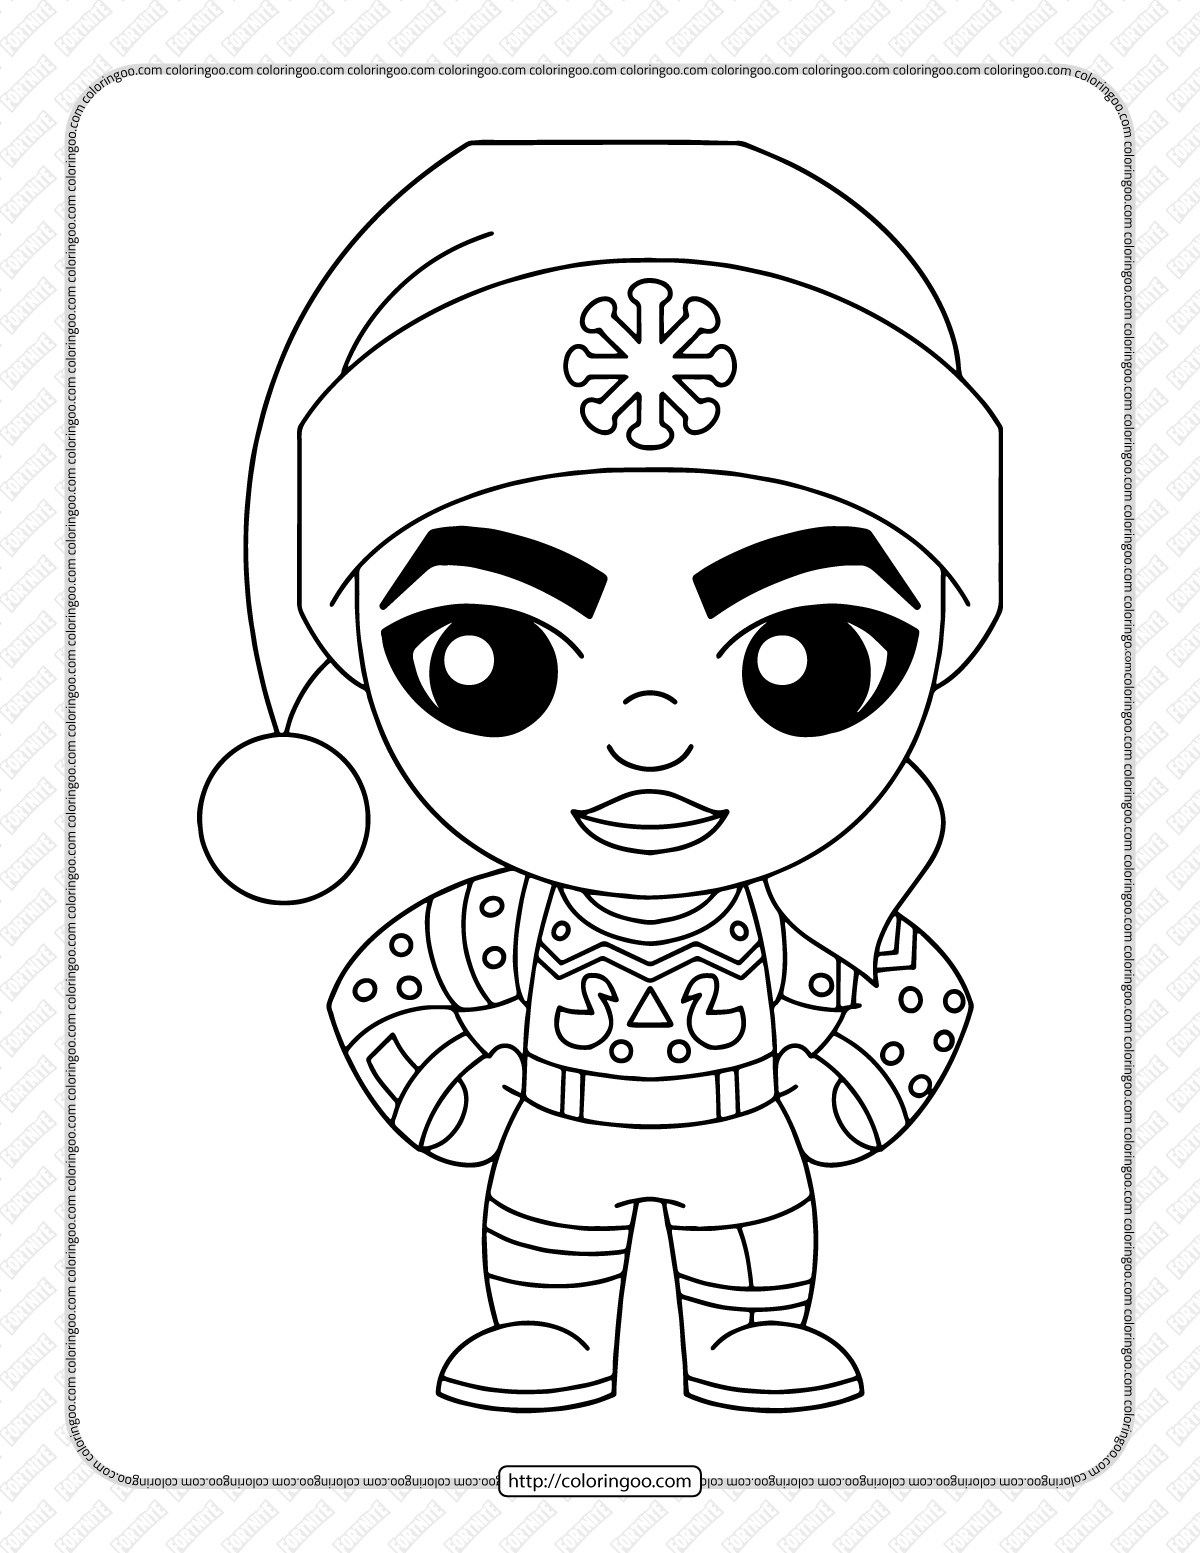 chibi fortnite coloring pages 09